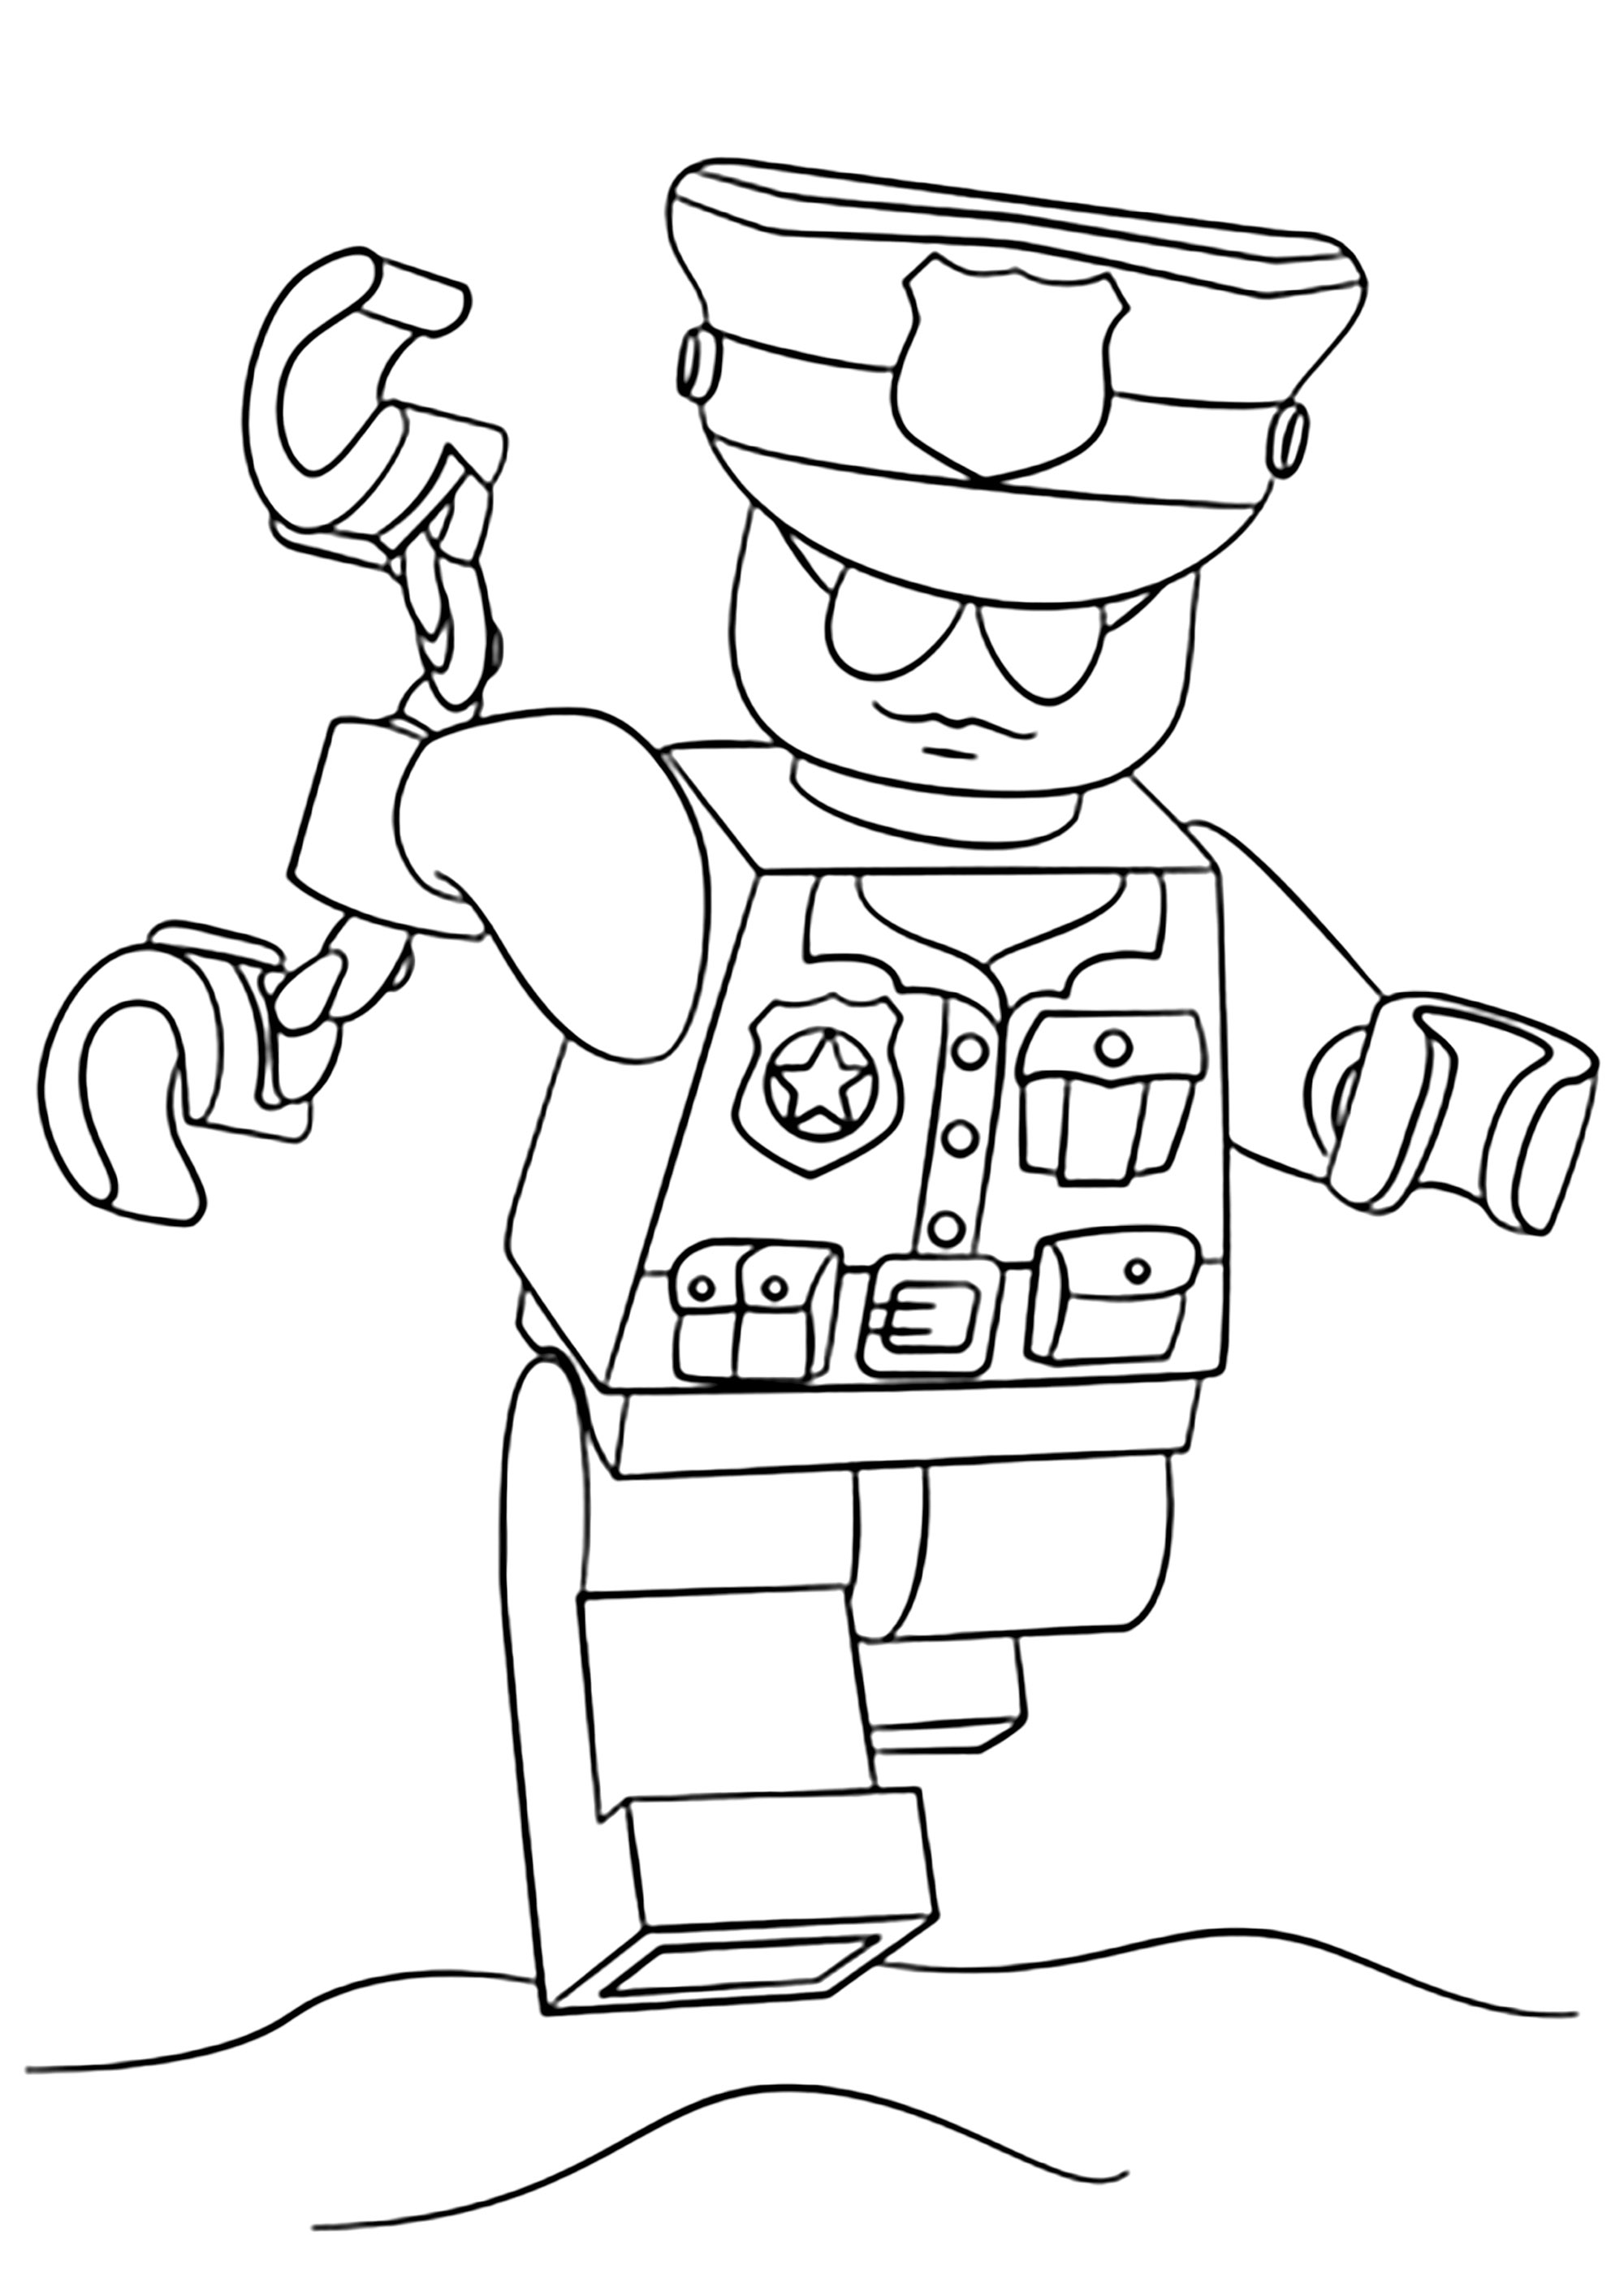 Policeman - Lego Kids Coloring Pages